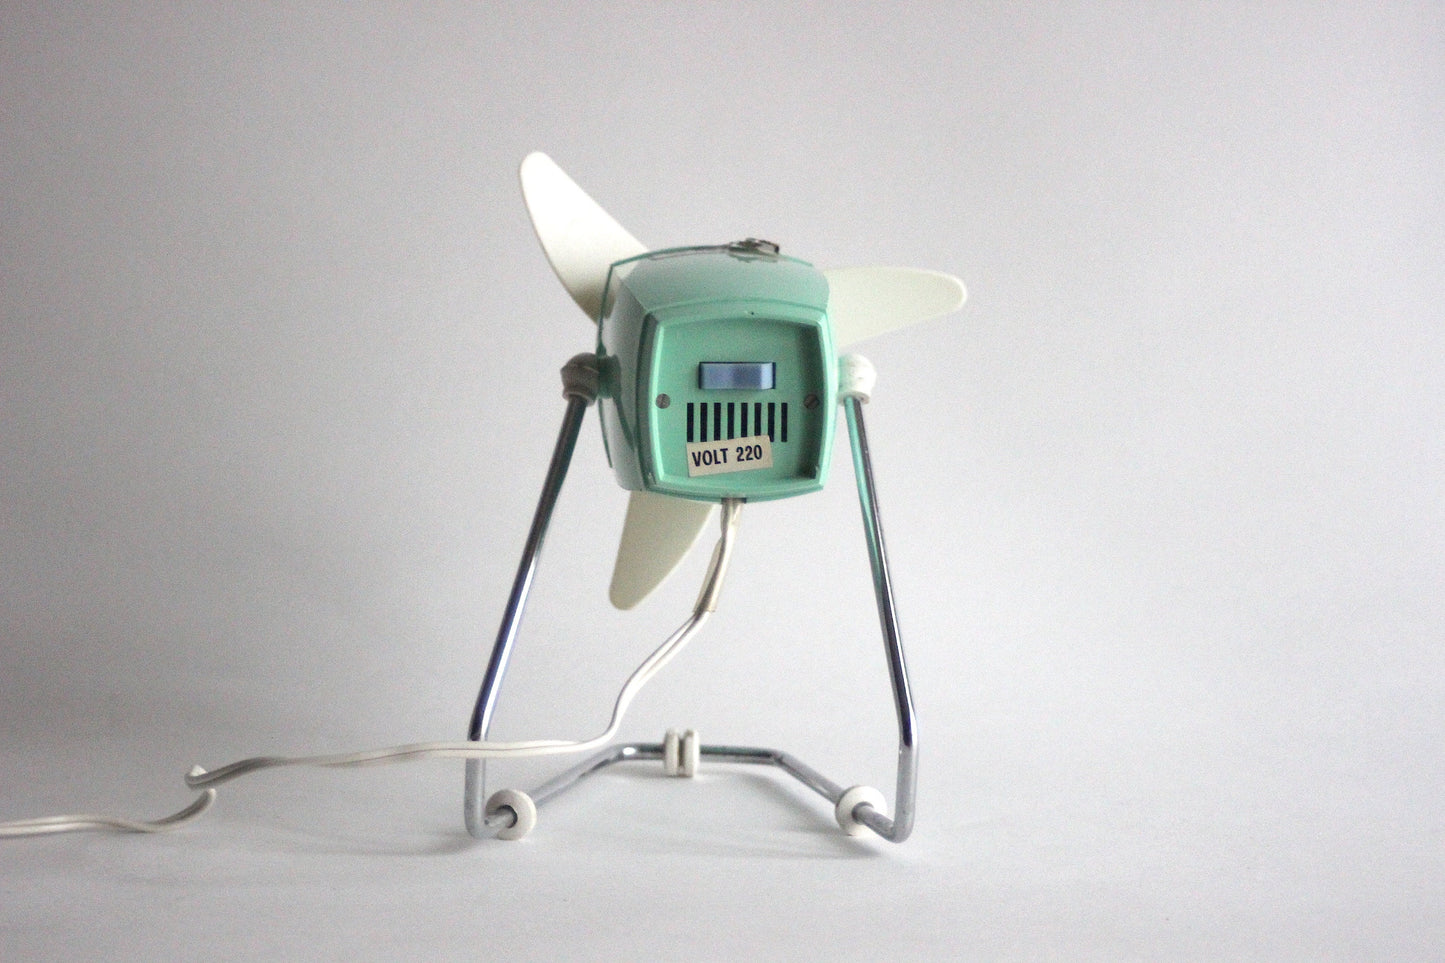 ONYX table fan from the 60s. Mint green and white. Space age design. Panton Era.